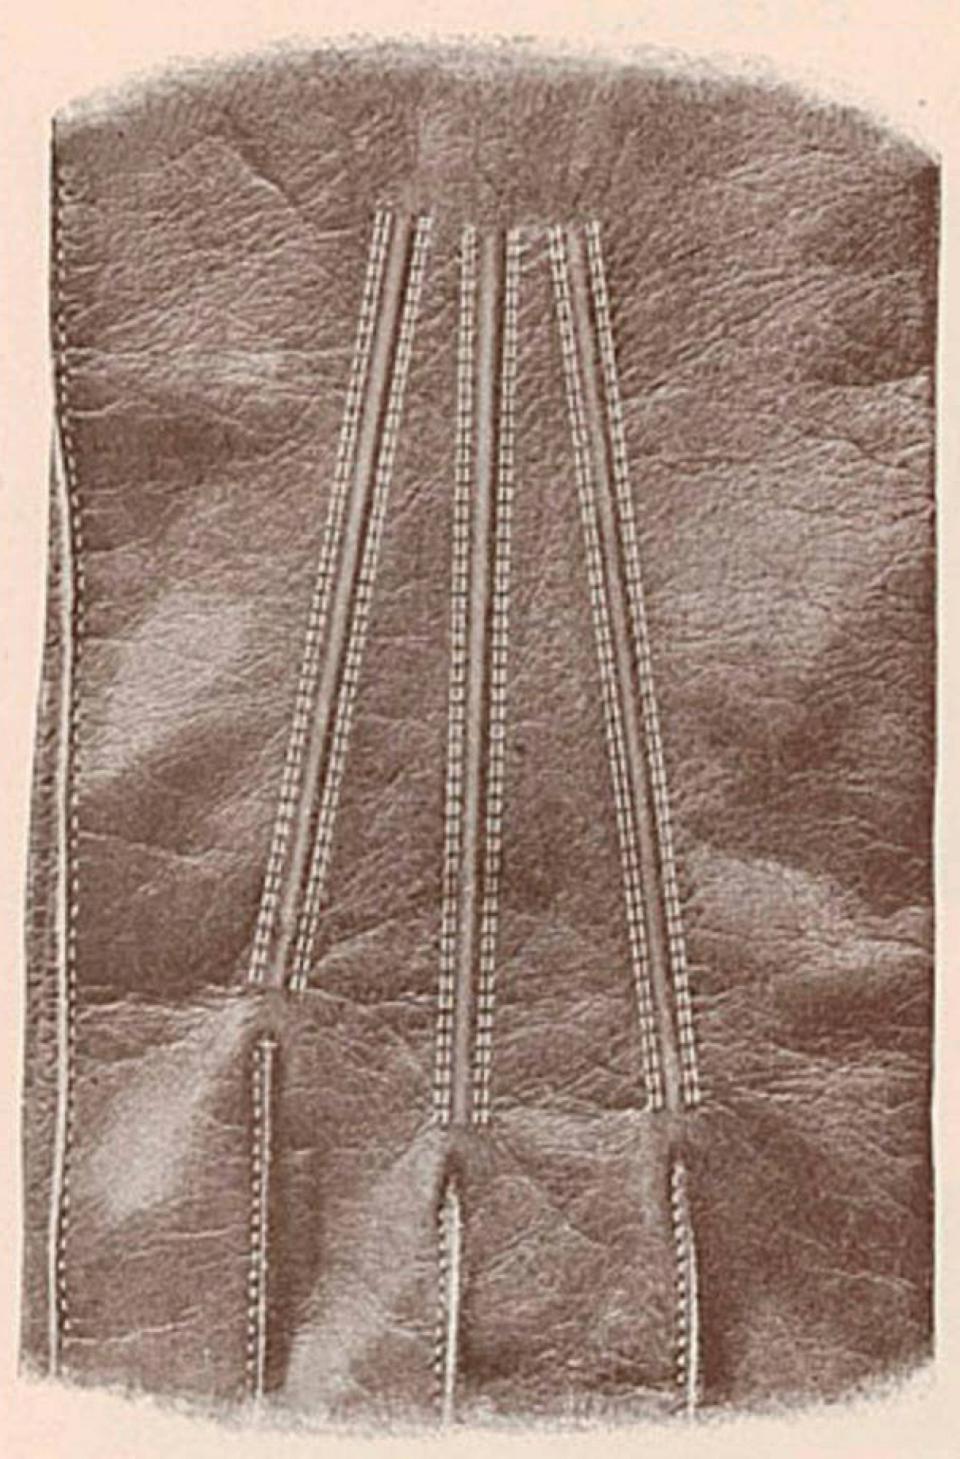 Photographic reproduction of the work of the Singer 37-4 Sewing Machine on a kid glove.